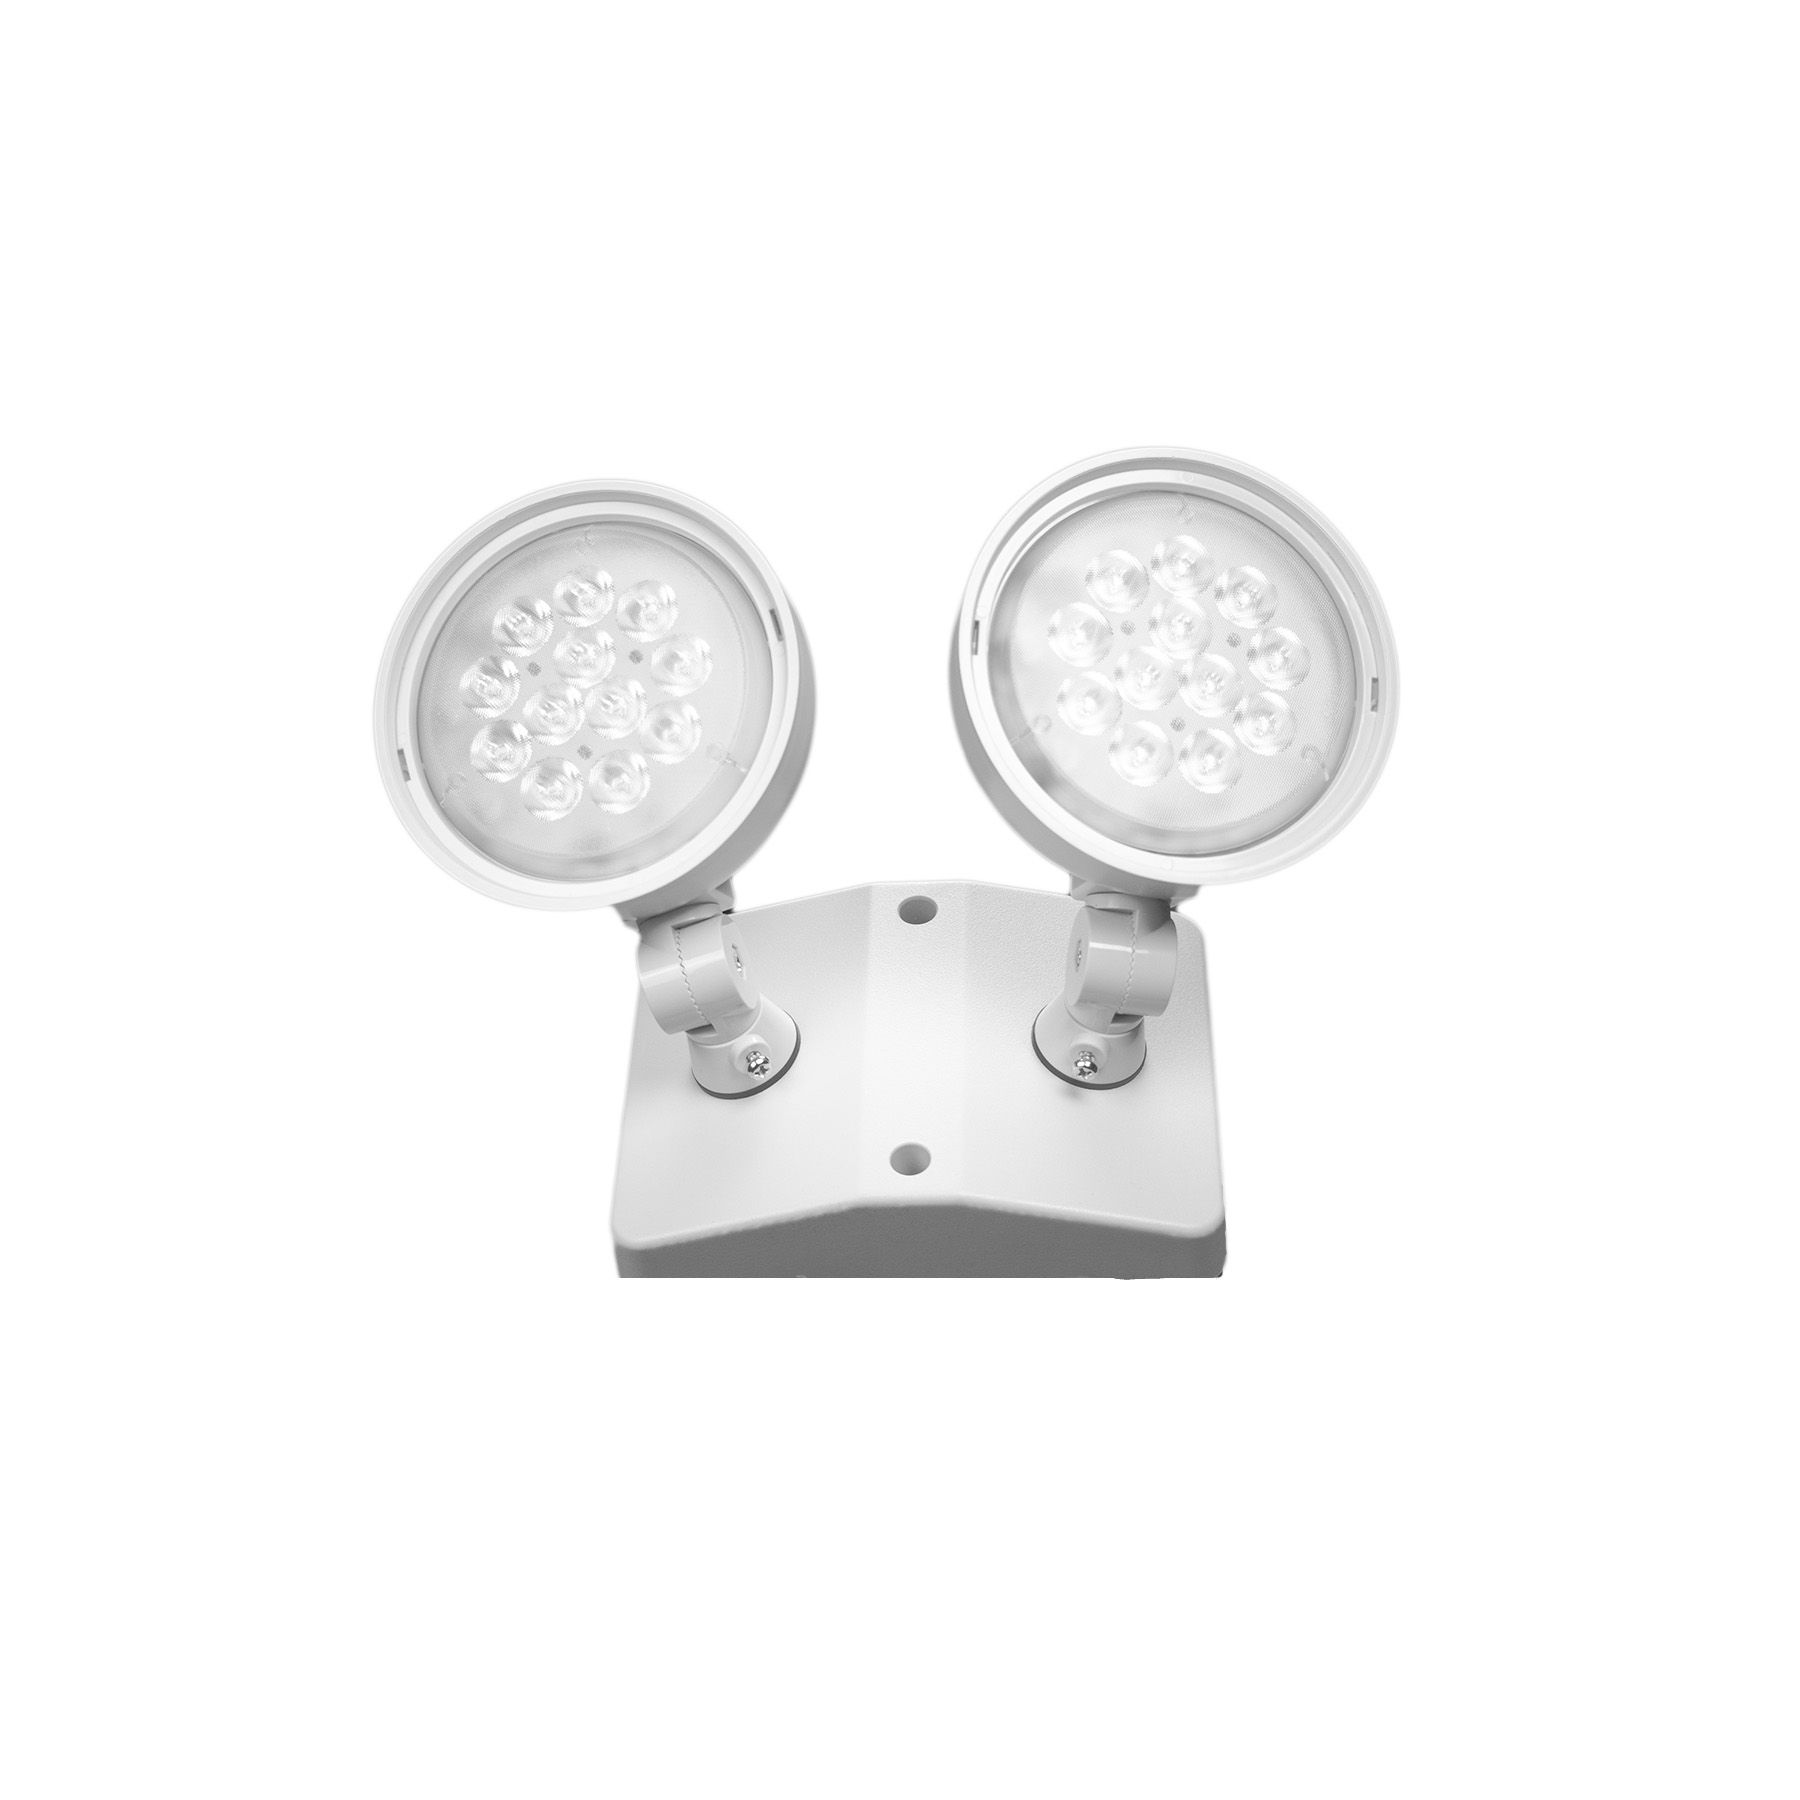 HIGH-POWER LED INDOOR POLYCARBONATE REMOTE HEADS-HPRL